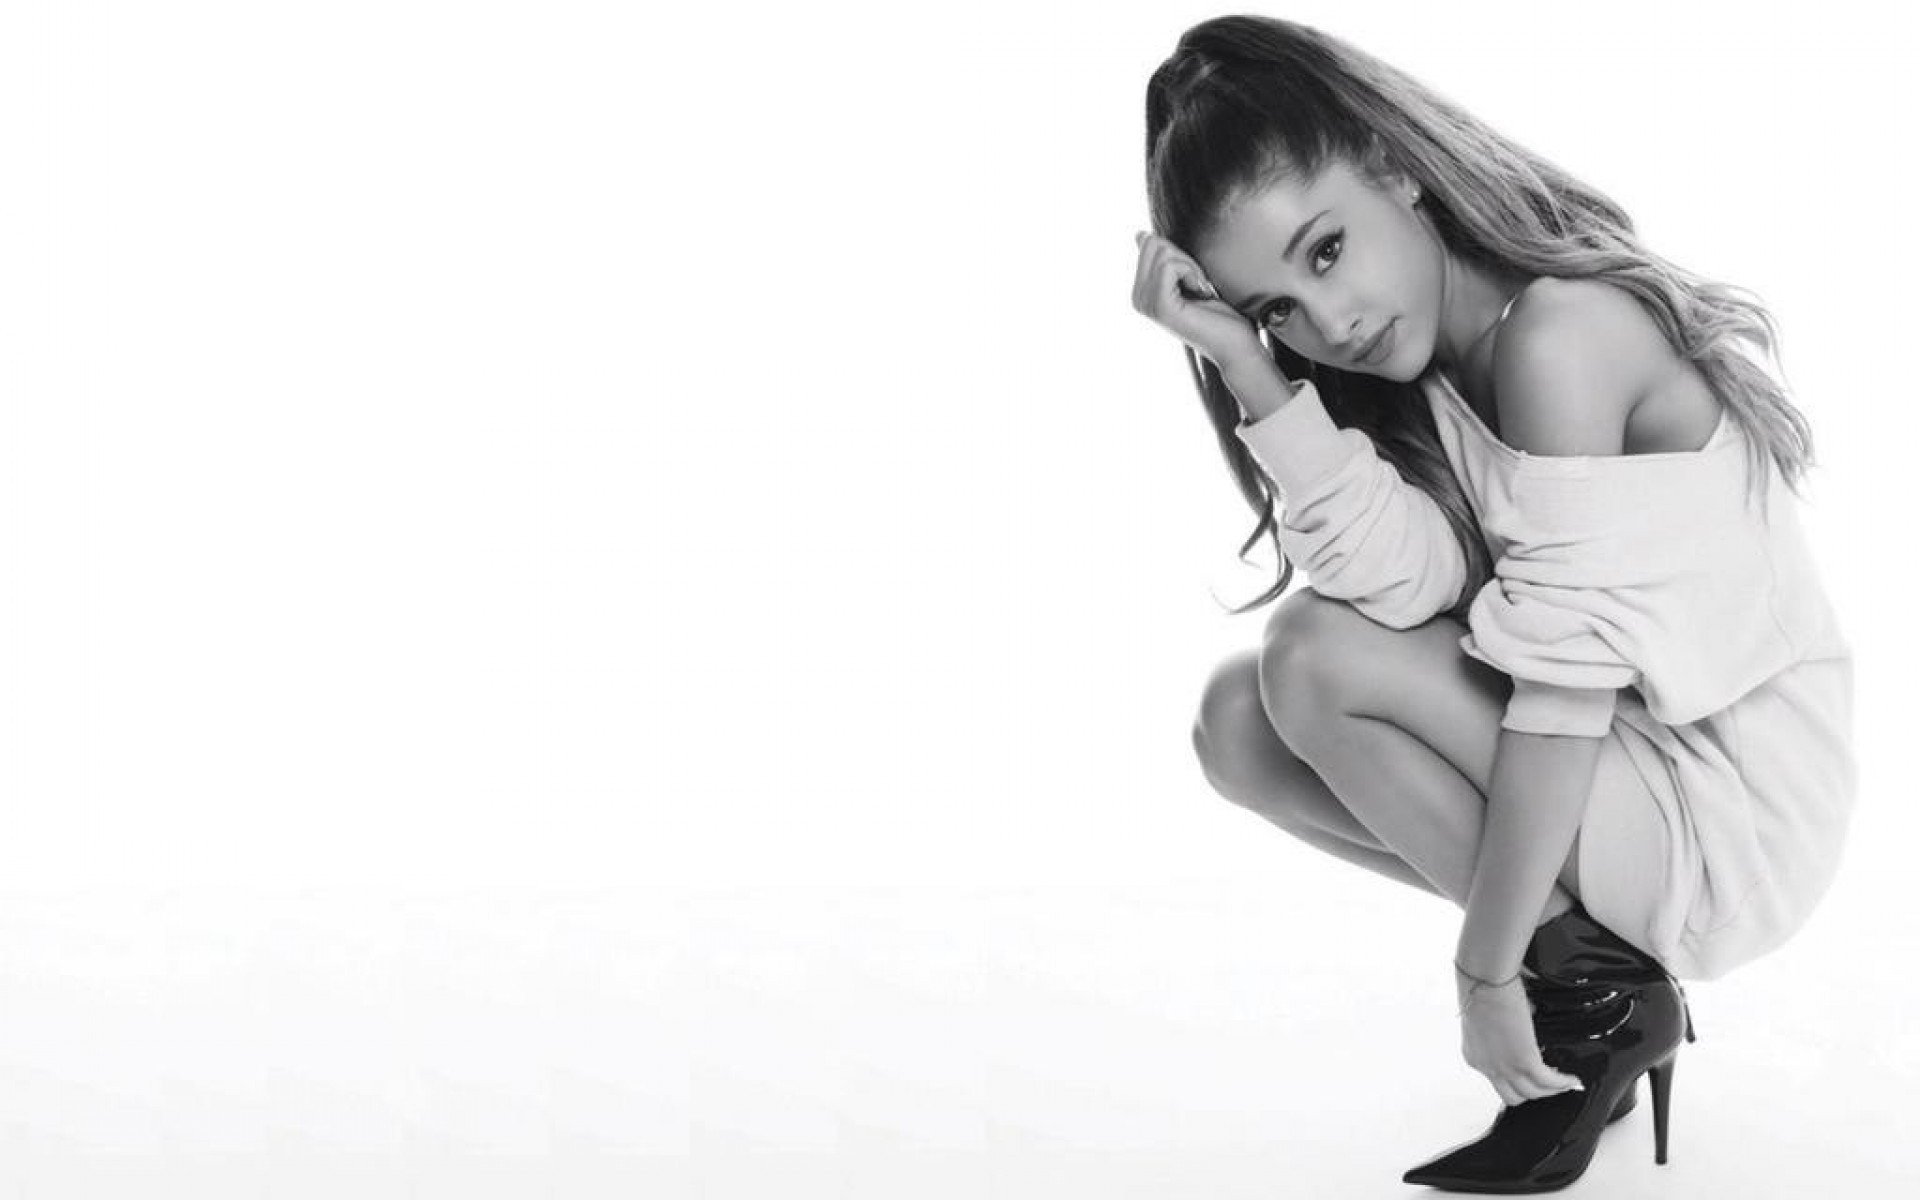 Women Monochrome Ariana Grande Hd Wallpapers Desktop And Mobile Images Photos